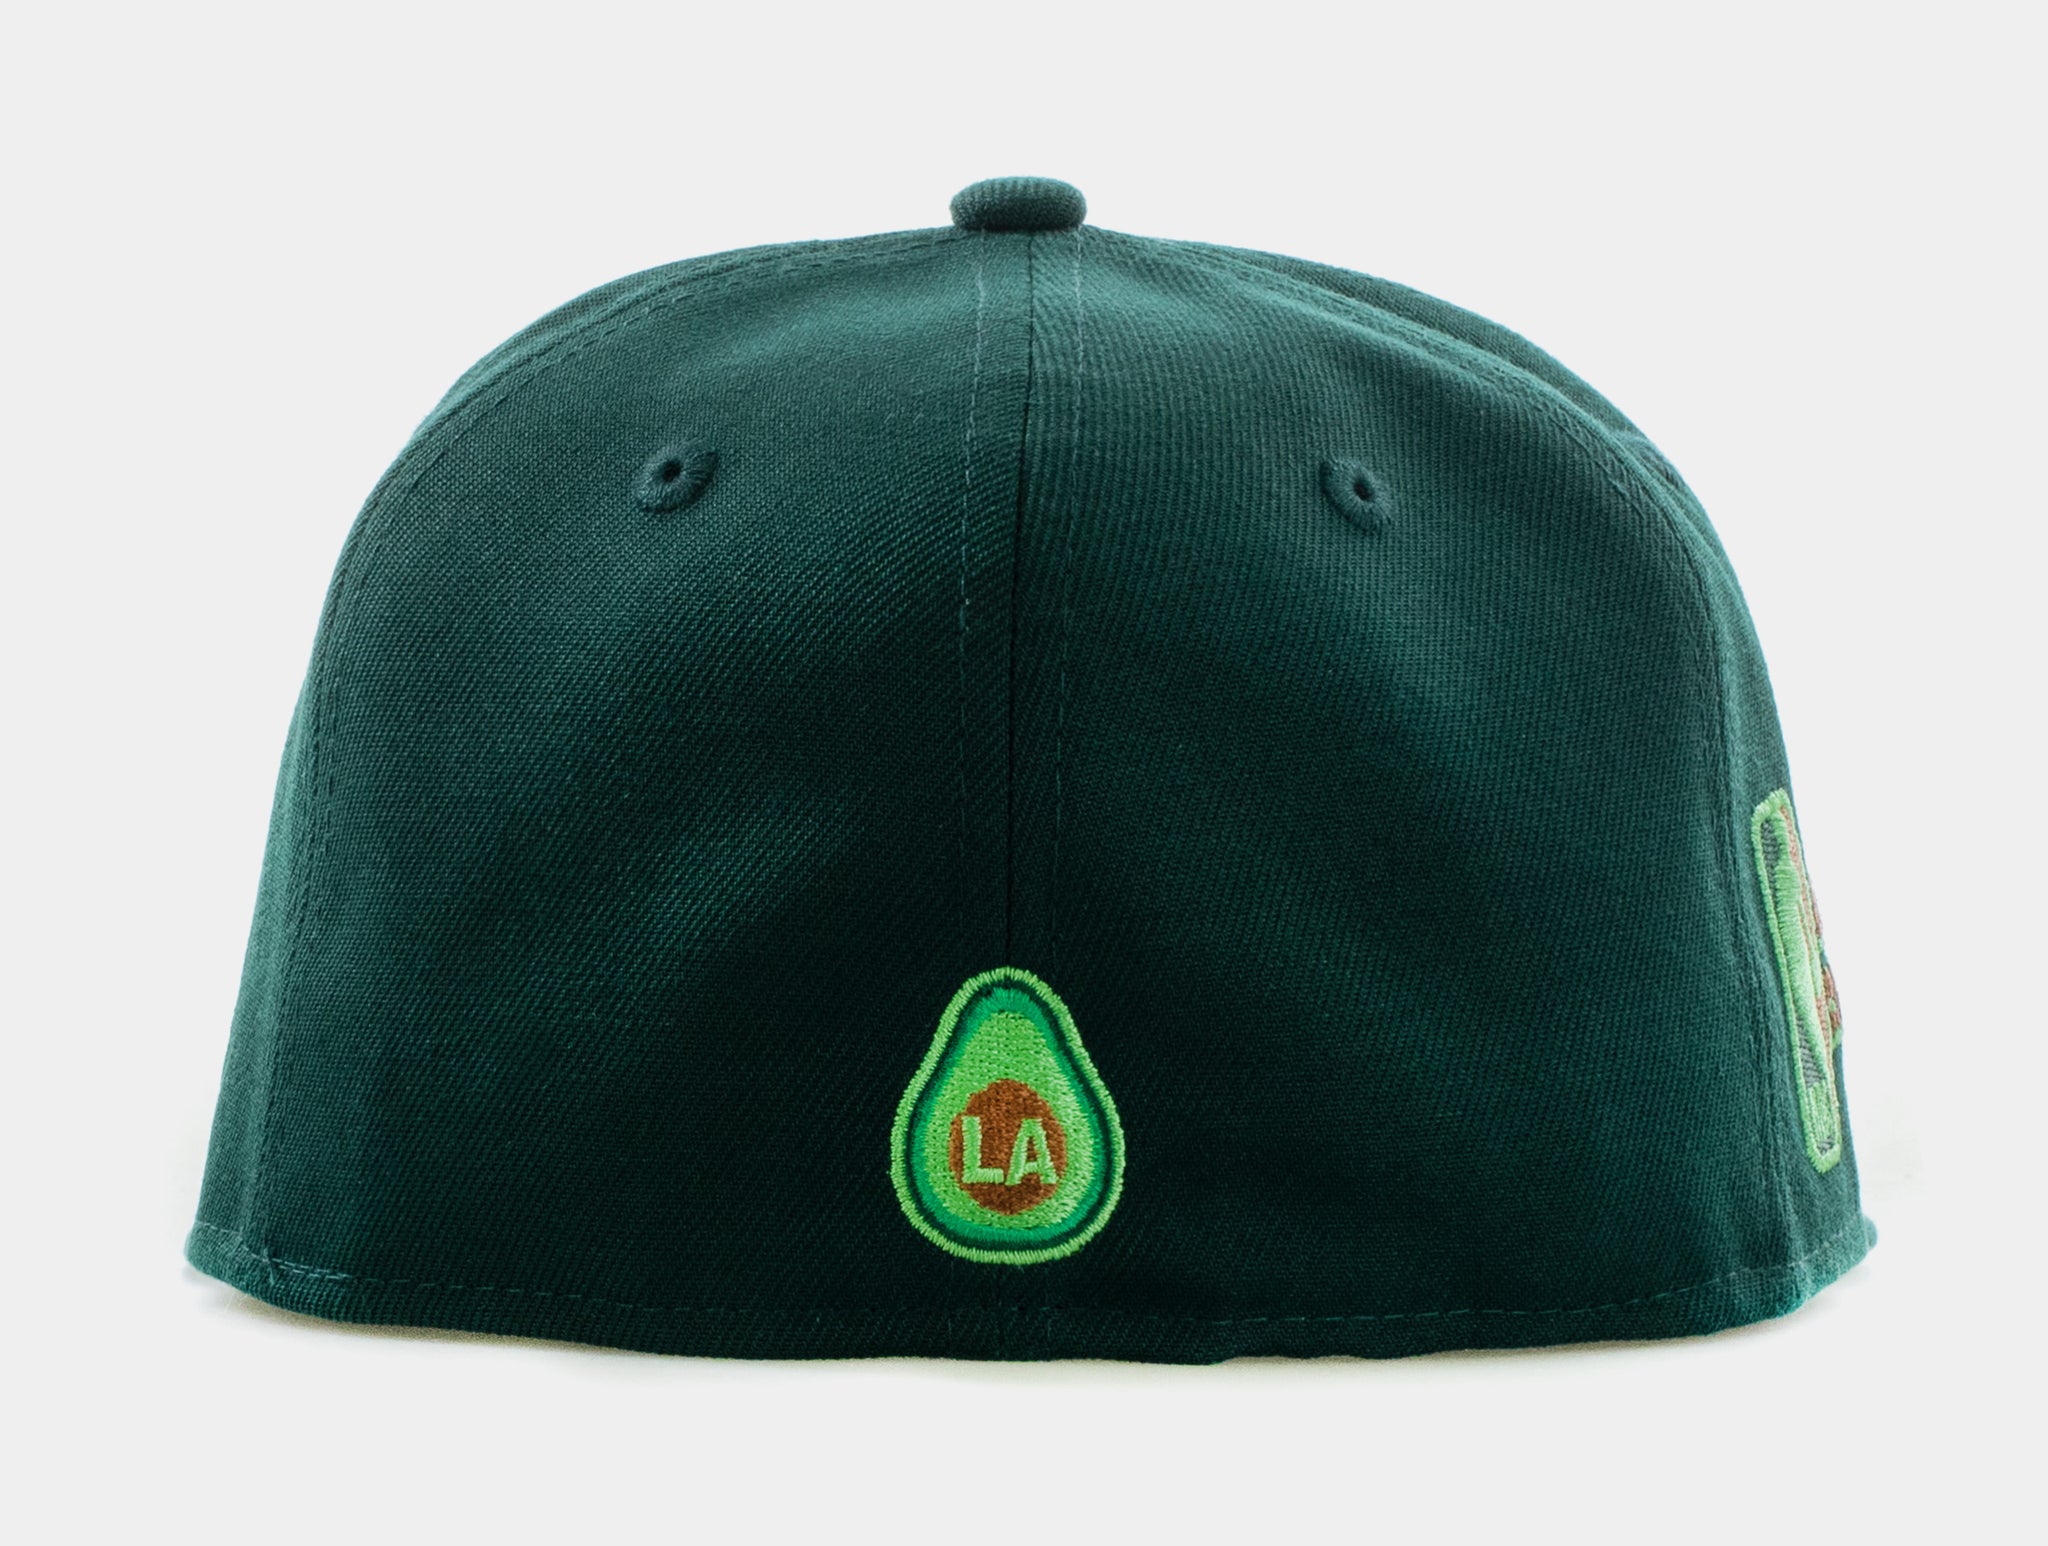 lakers green hat